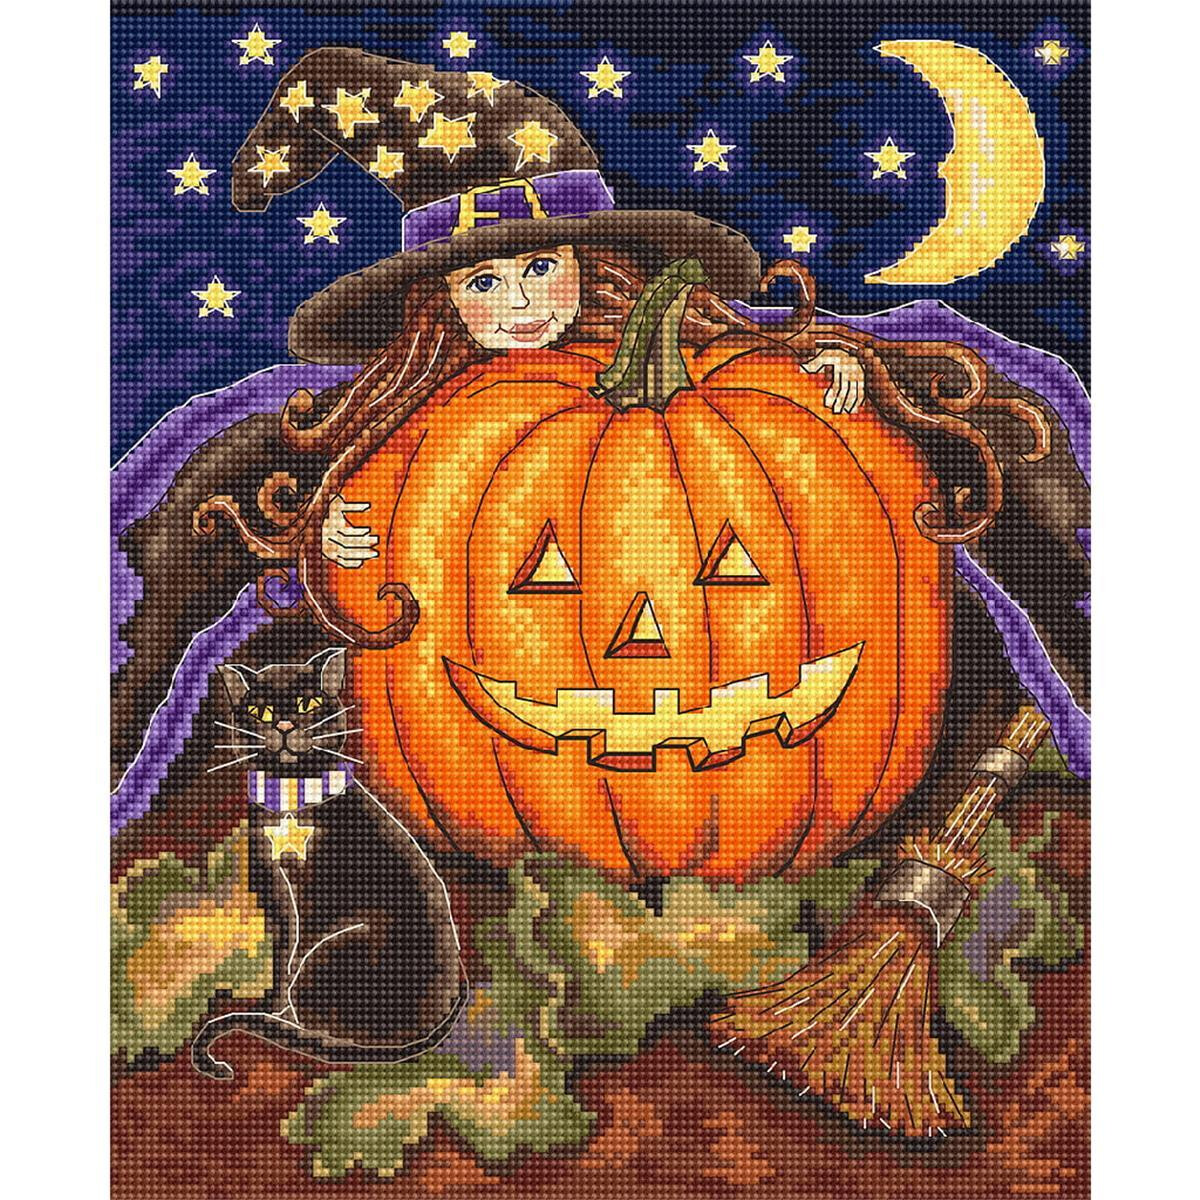 A whimsical Halloween scene shows a young witch with...